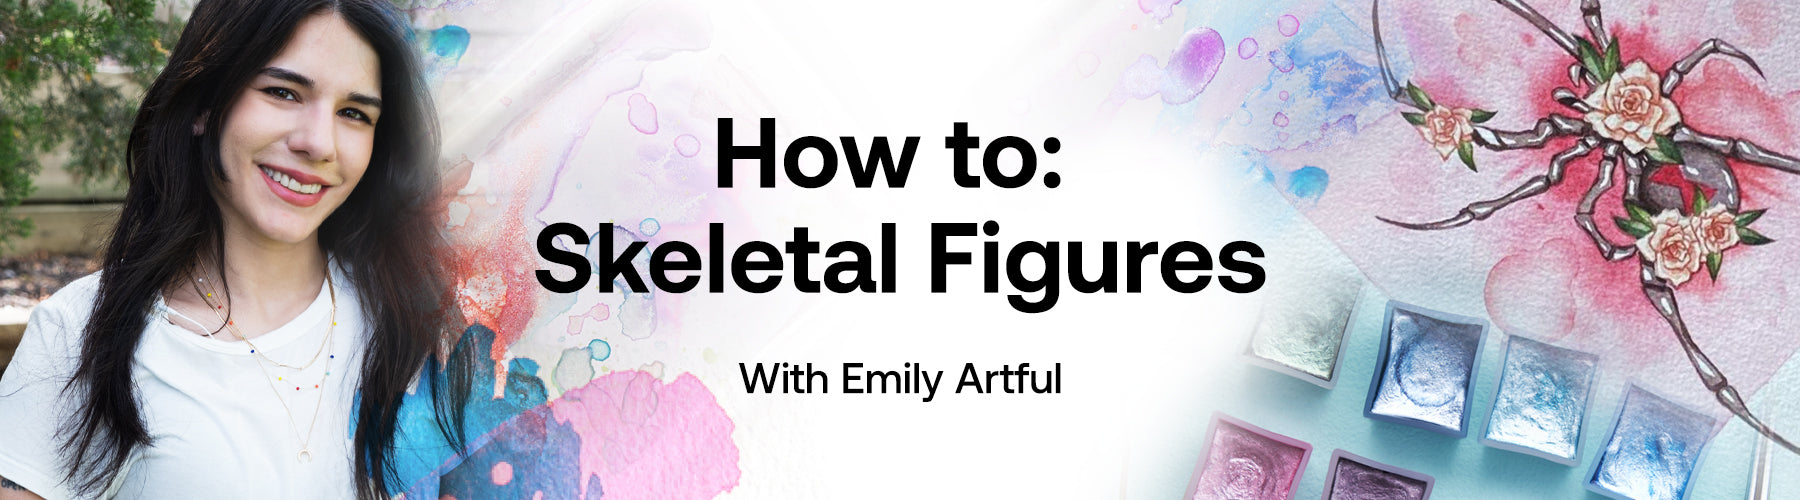 How to: Paint Skeletal Figures with Emily Artful